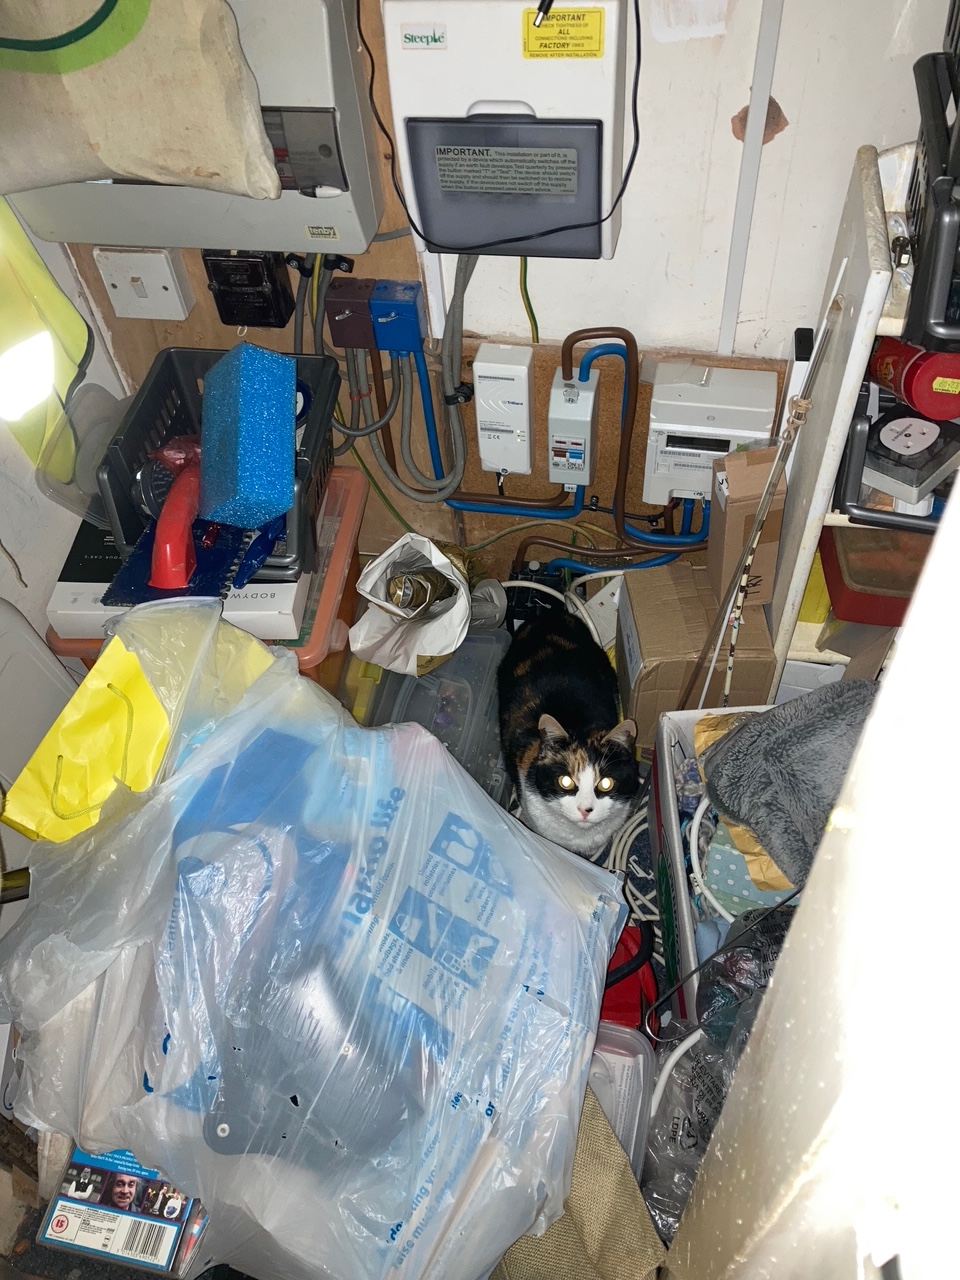 An image of a cat in a cluttered room.